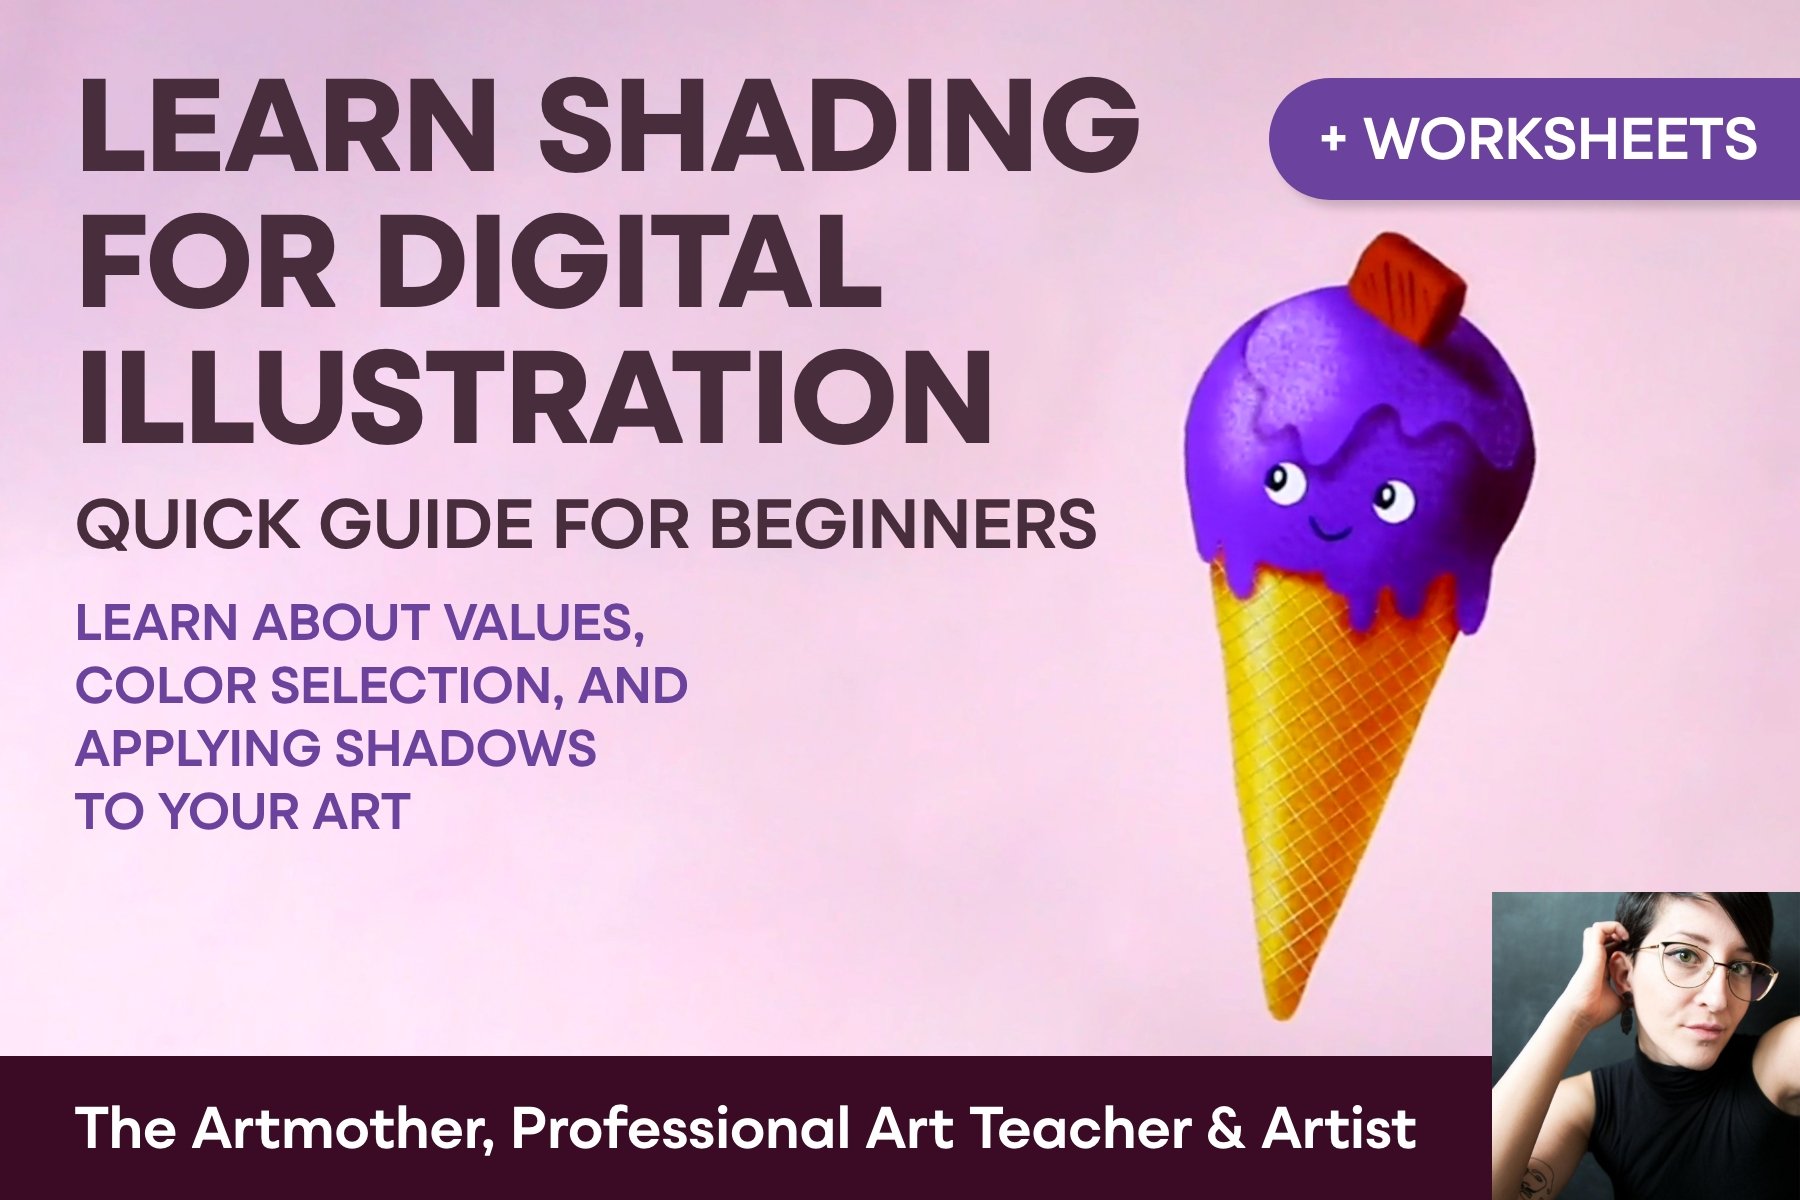 Learn Shading for Digital Illustration - Quick Guide for Beginners